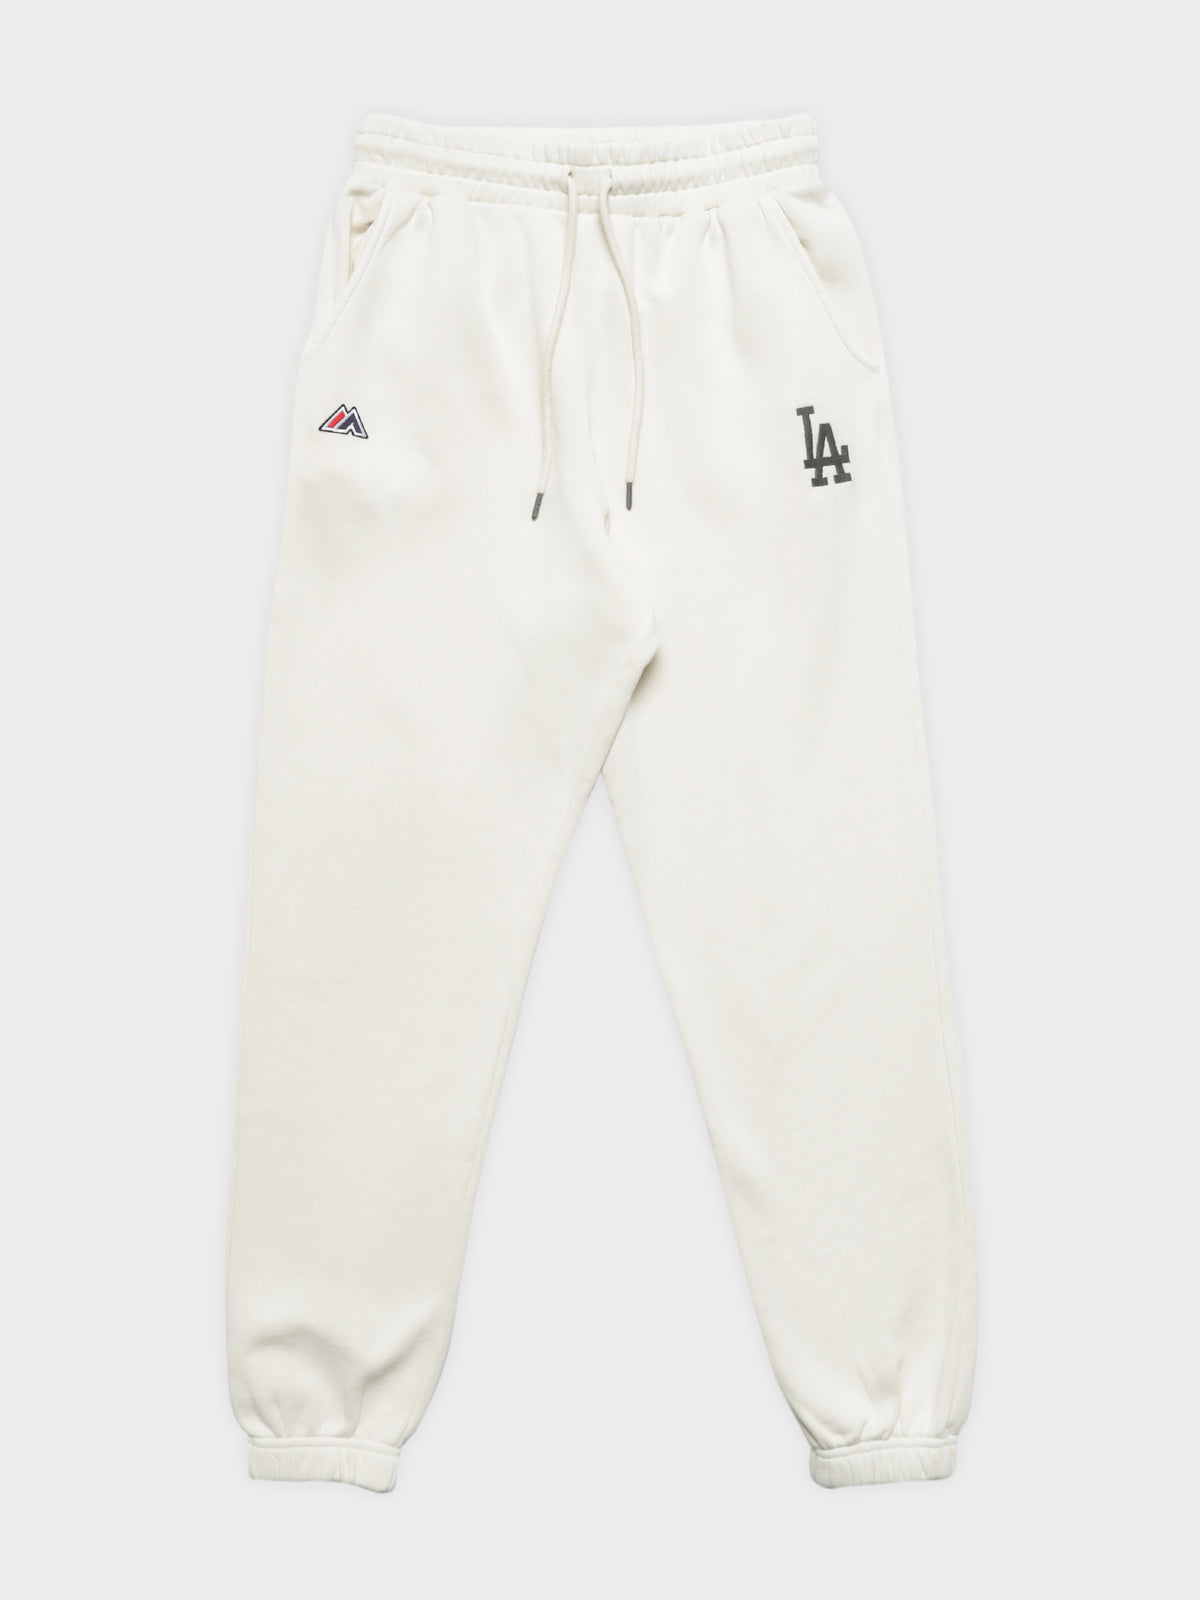 Players LA Dodgers Trackpants in Unbleached